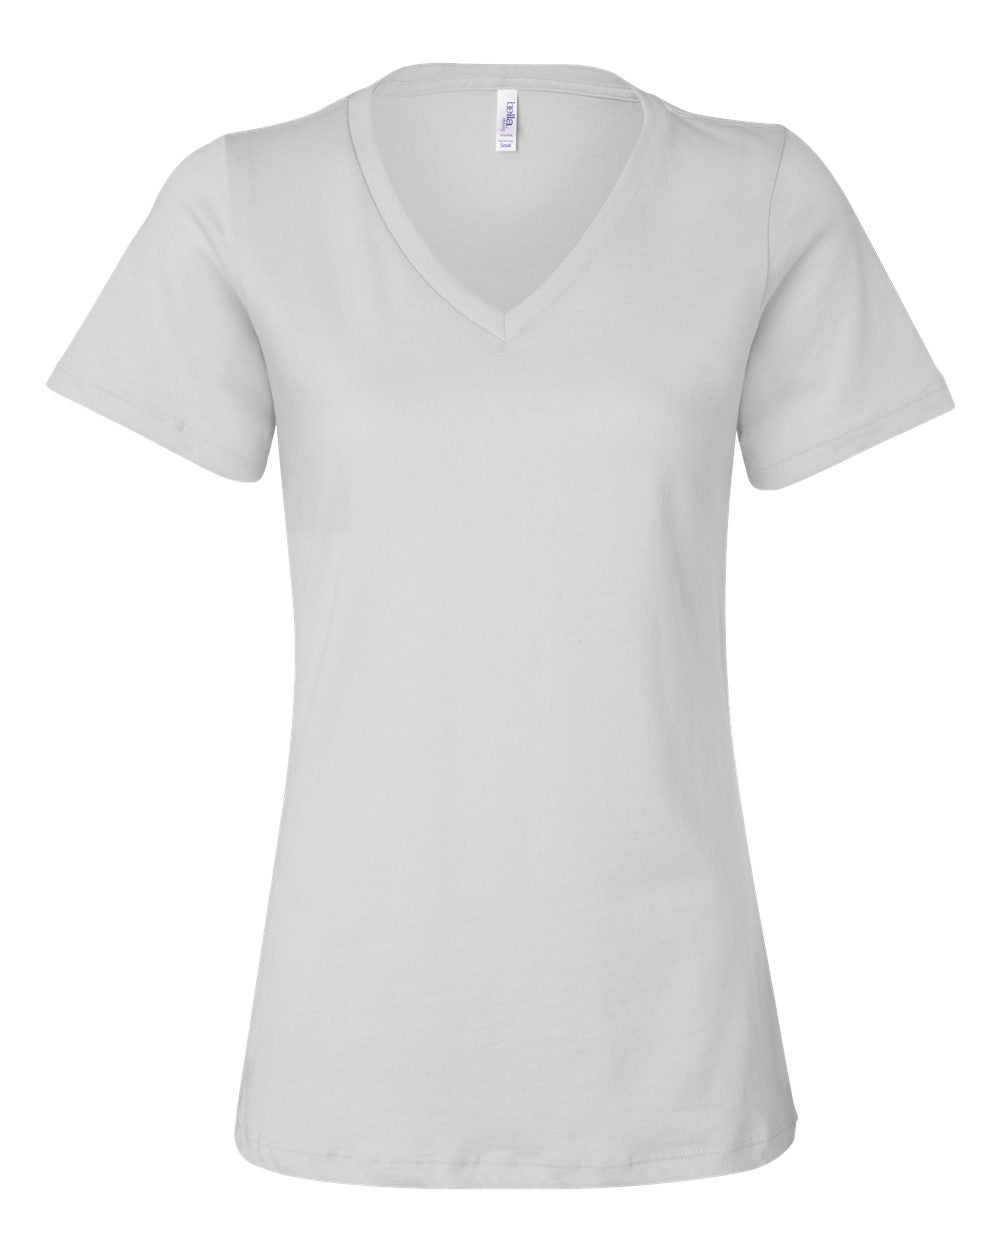 BELLA + CANVAS Women’s Relaxed Jersey V-Neck Tee 6405 #color_White